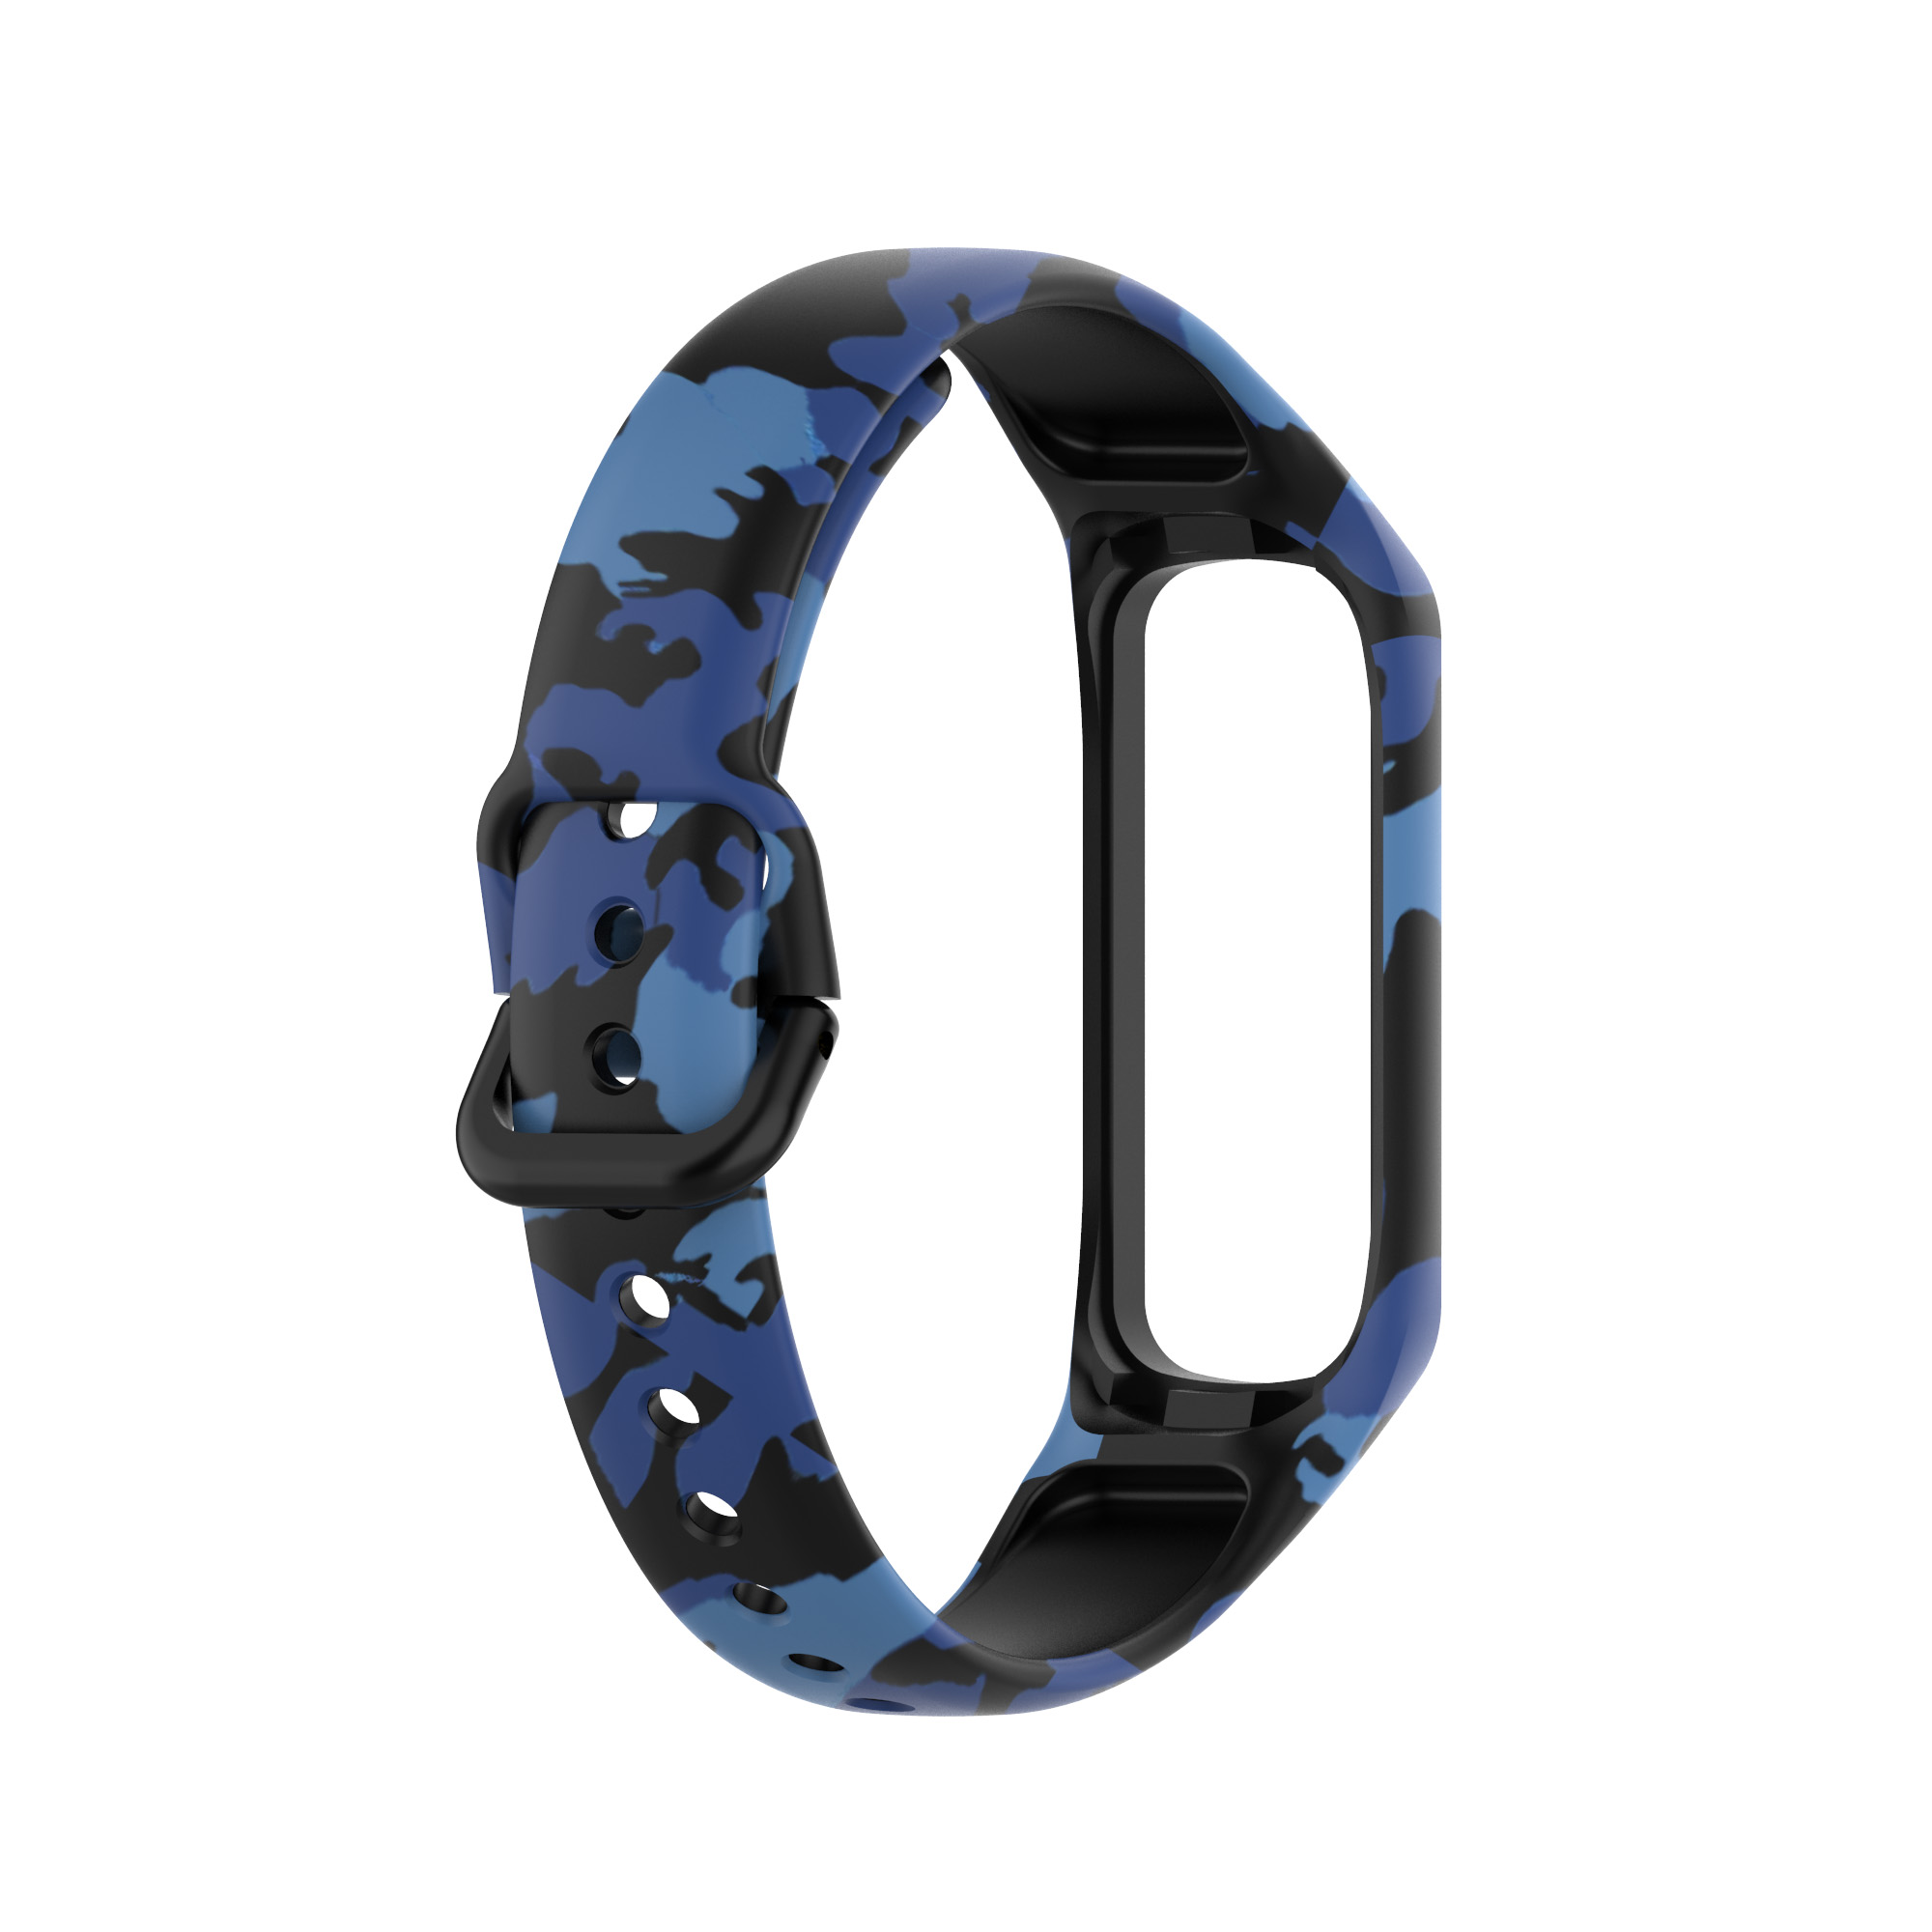 Bakeey-Printed-Pattern-Stainless-Steel-Buckle-Smart-watch-Band-Replacement-Strap-For-Samsung-Galaxy--1806217-23